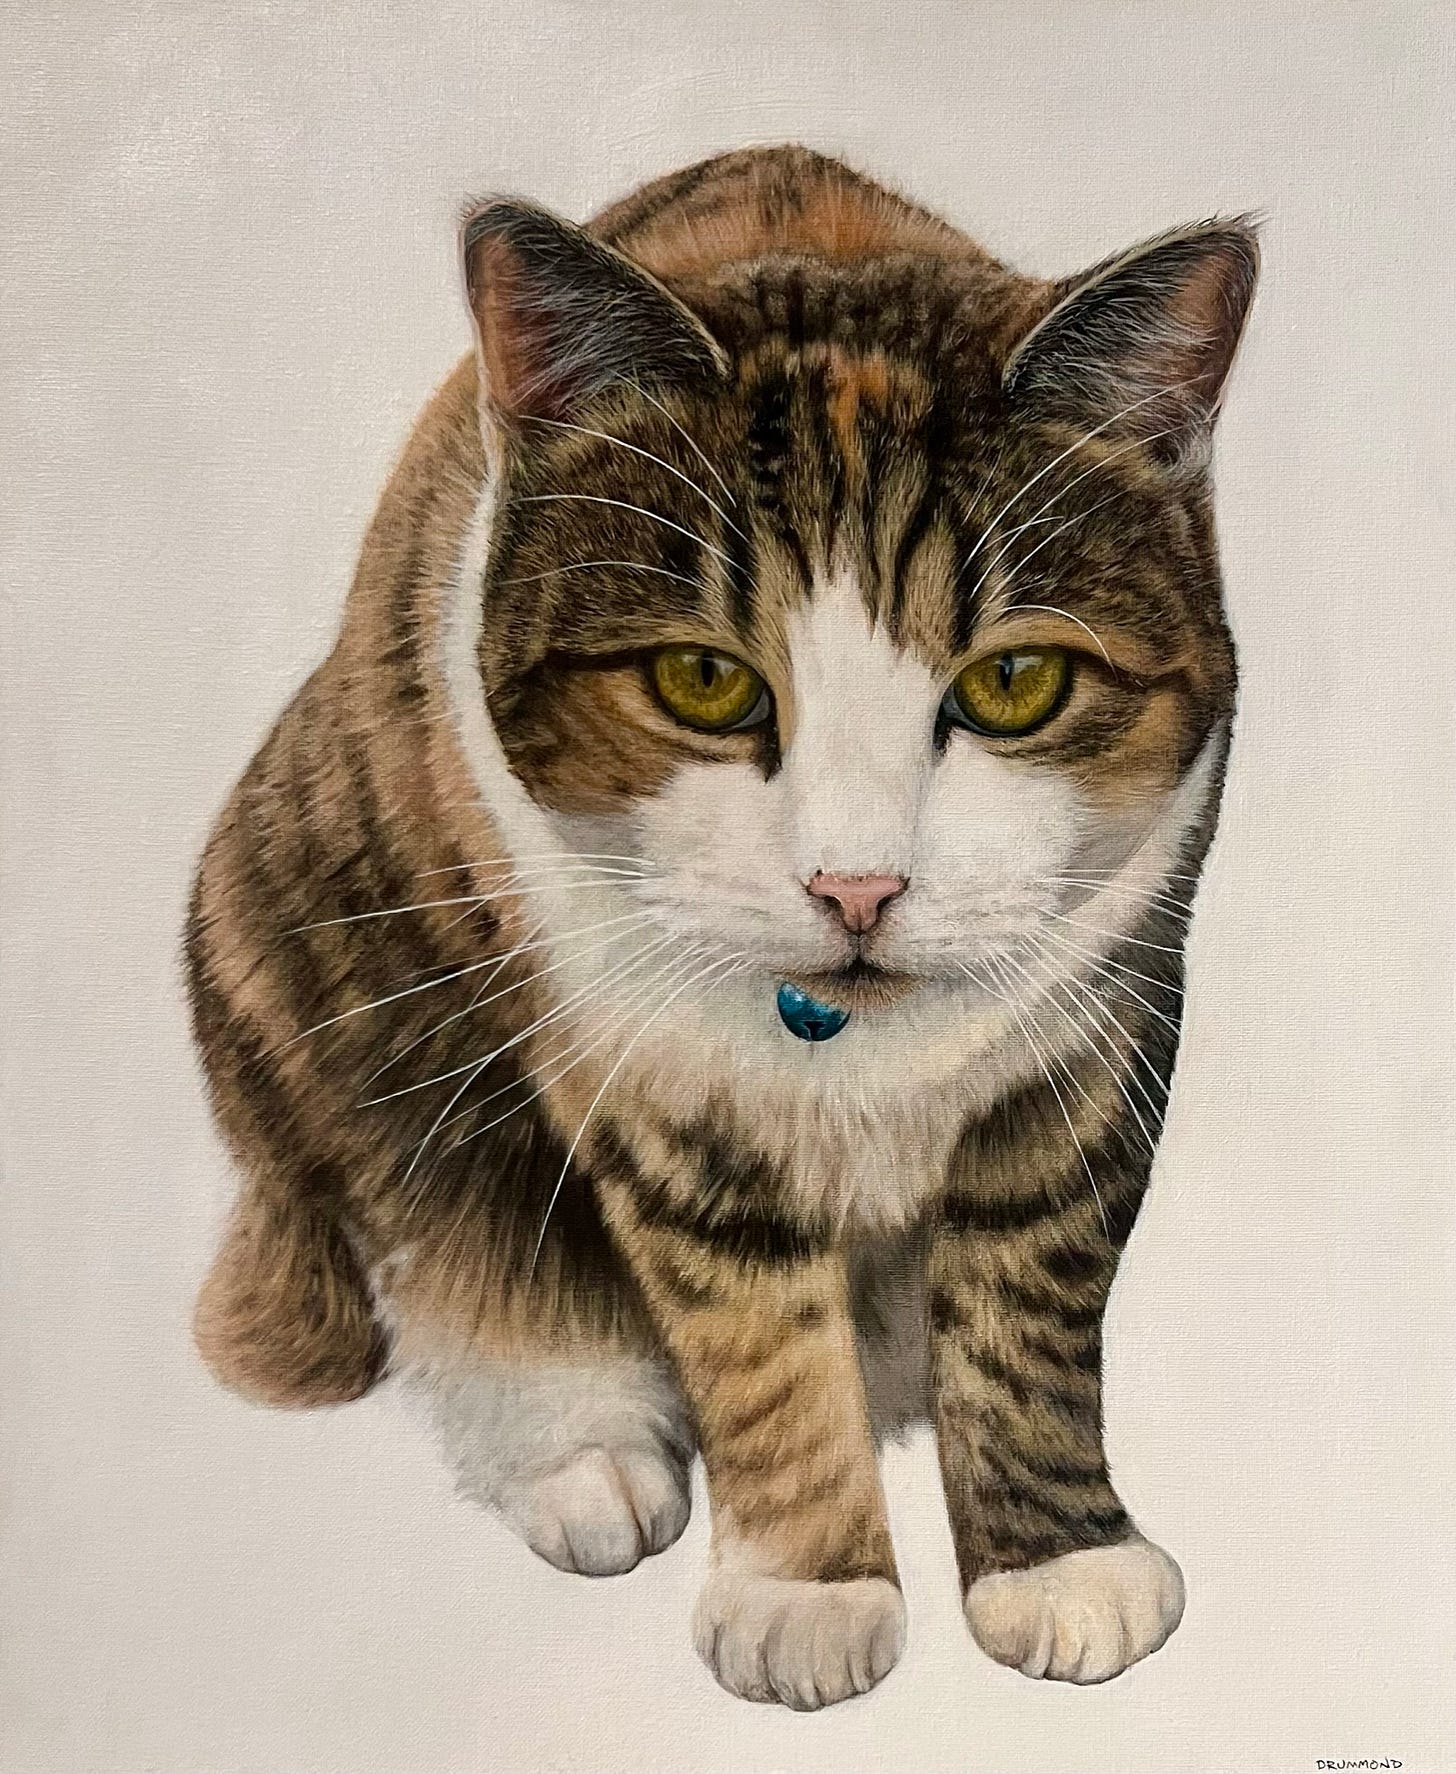 A painting of a young calico cat.